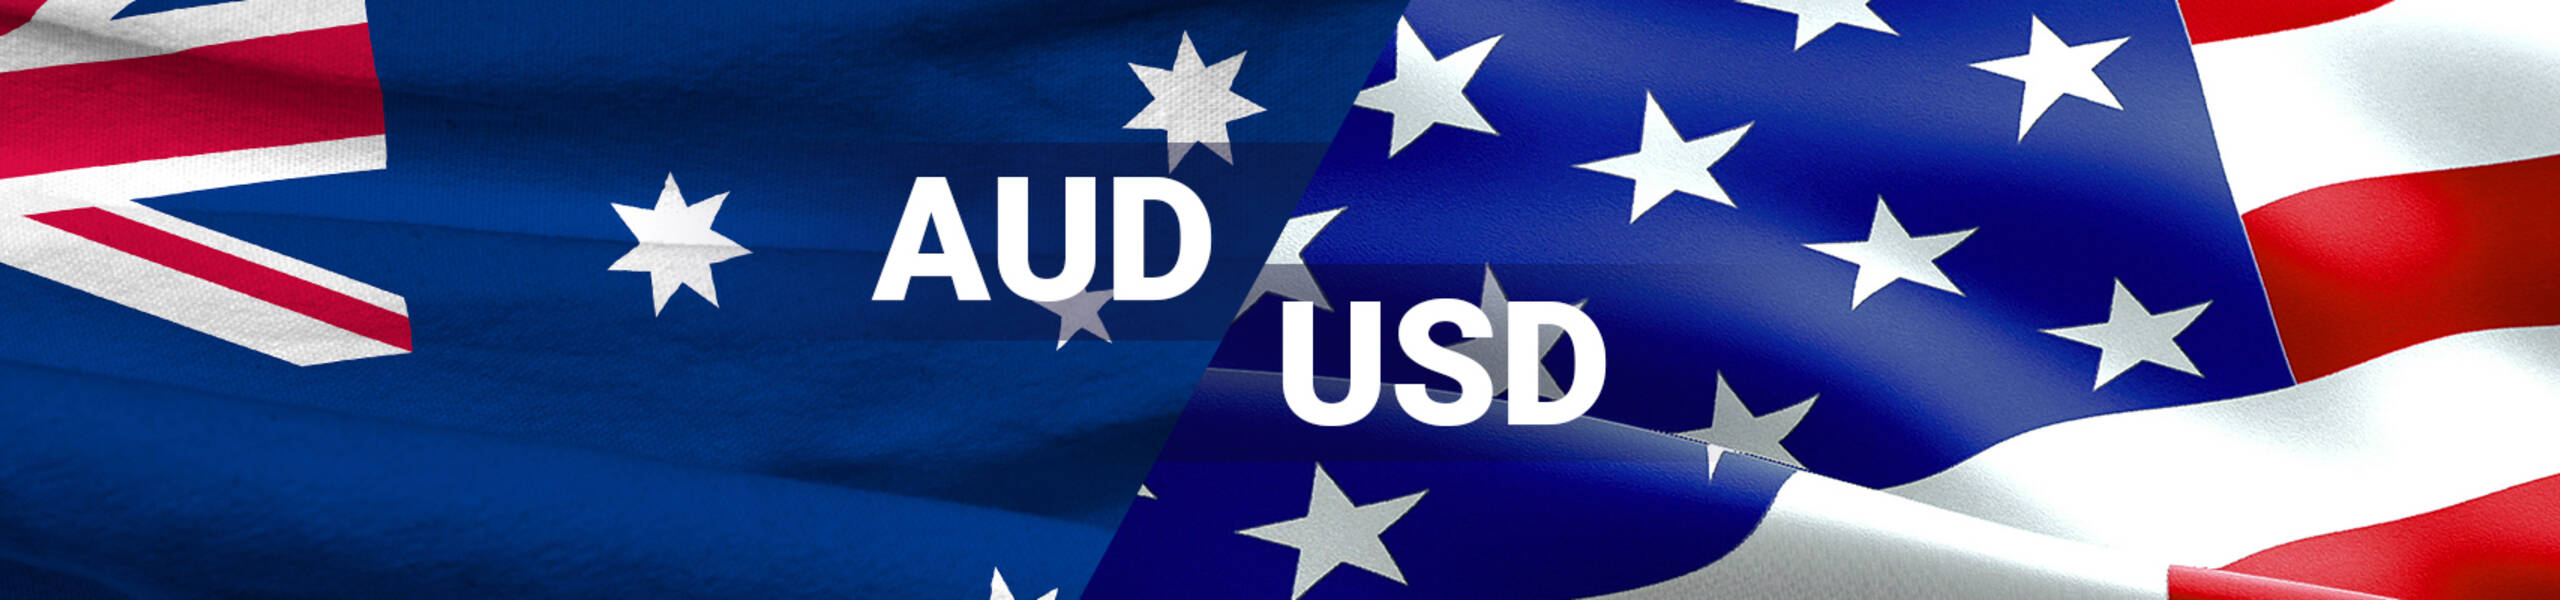 AUD/USD holding above demand zone